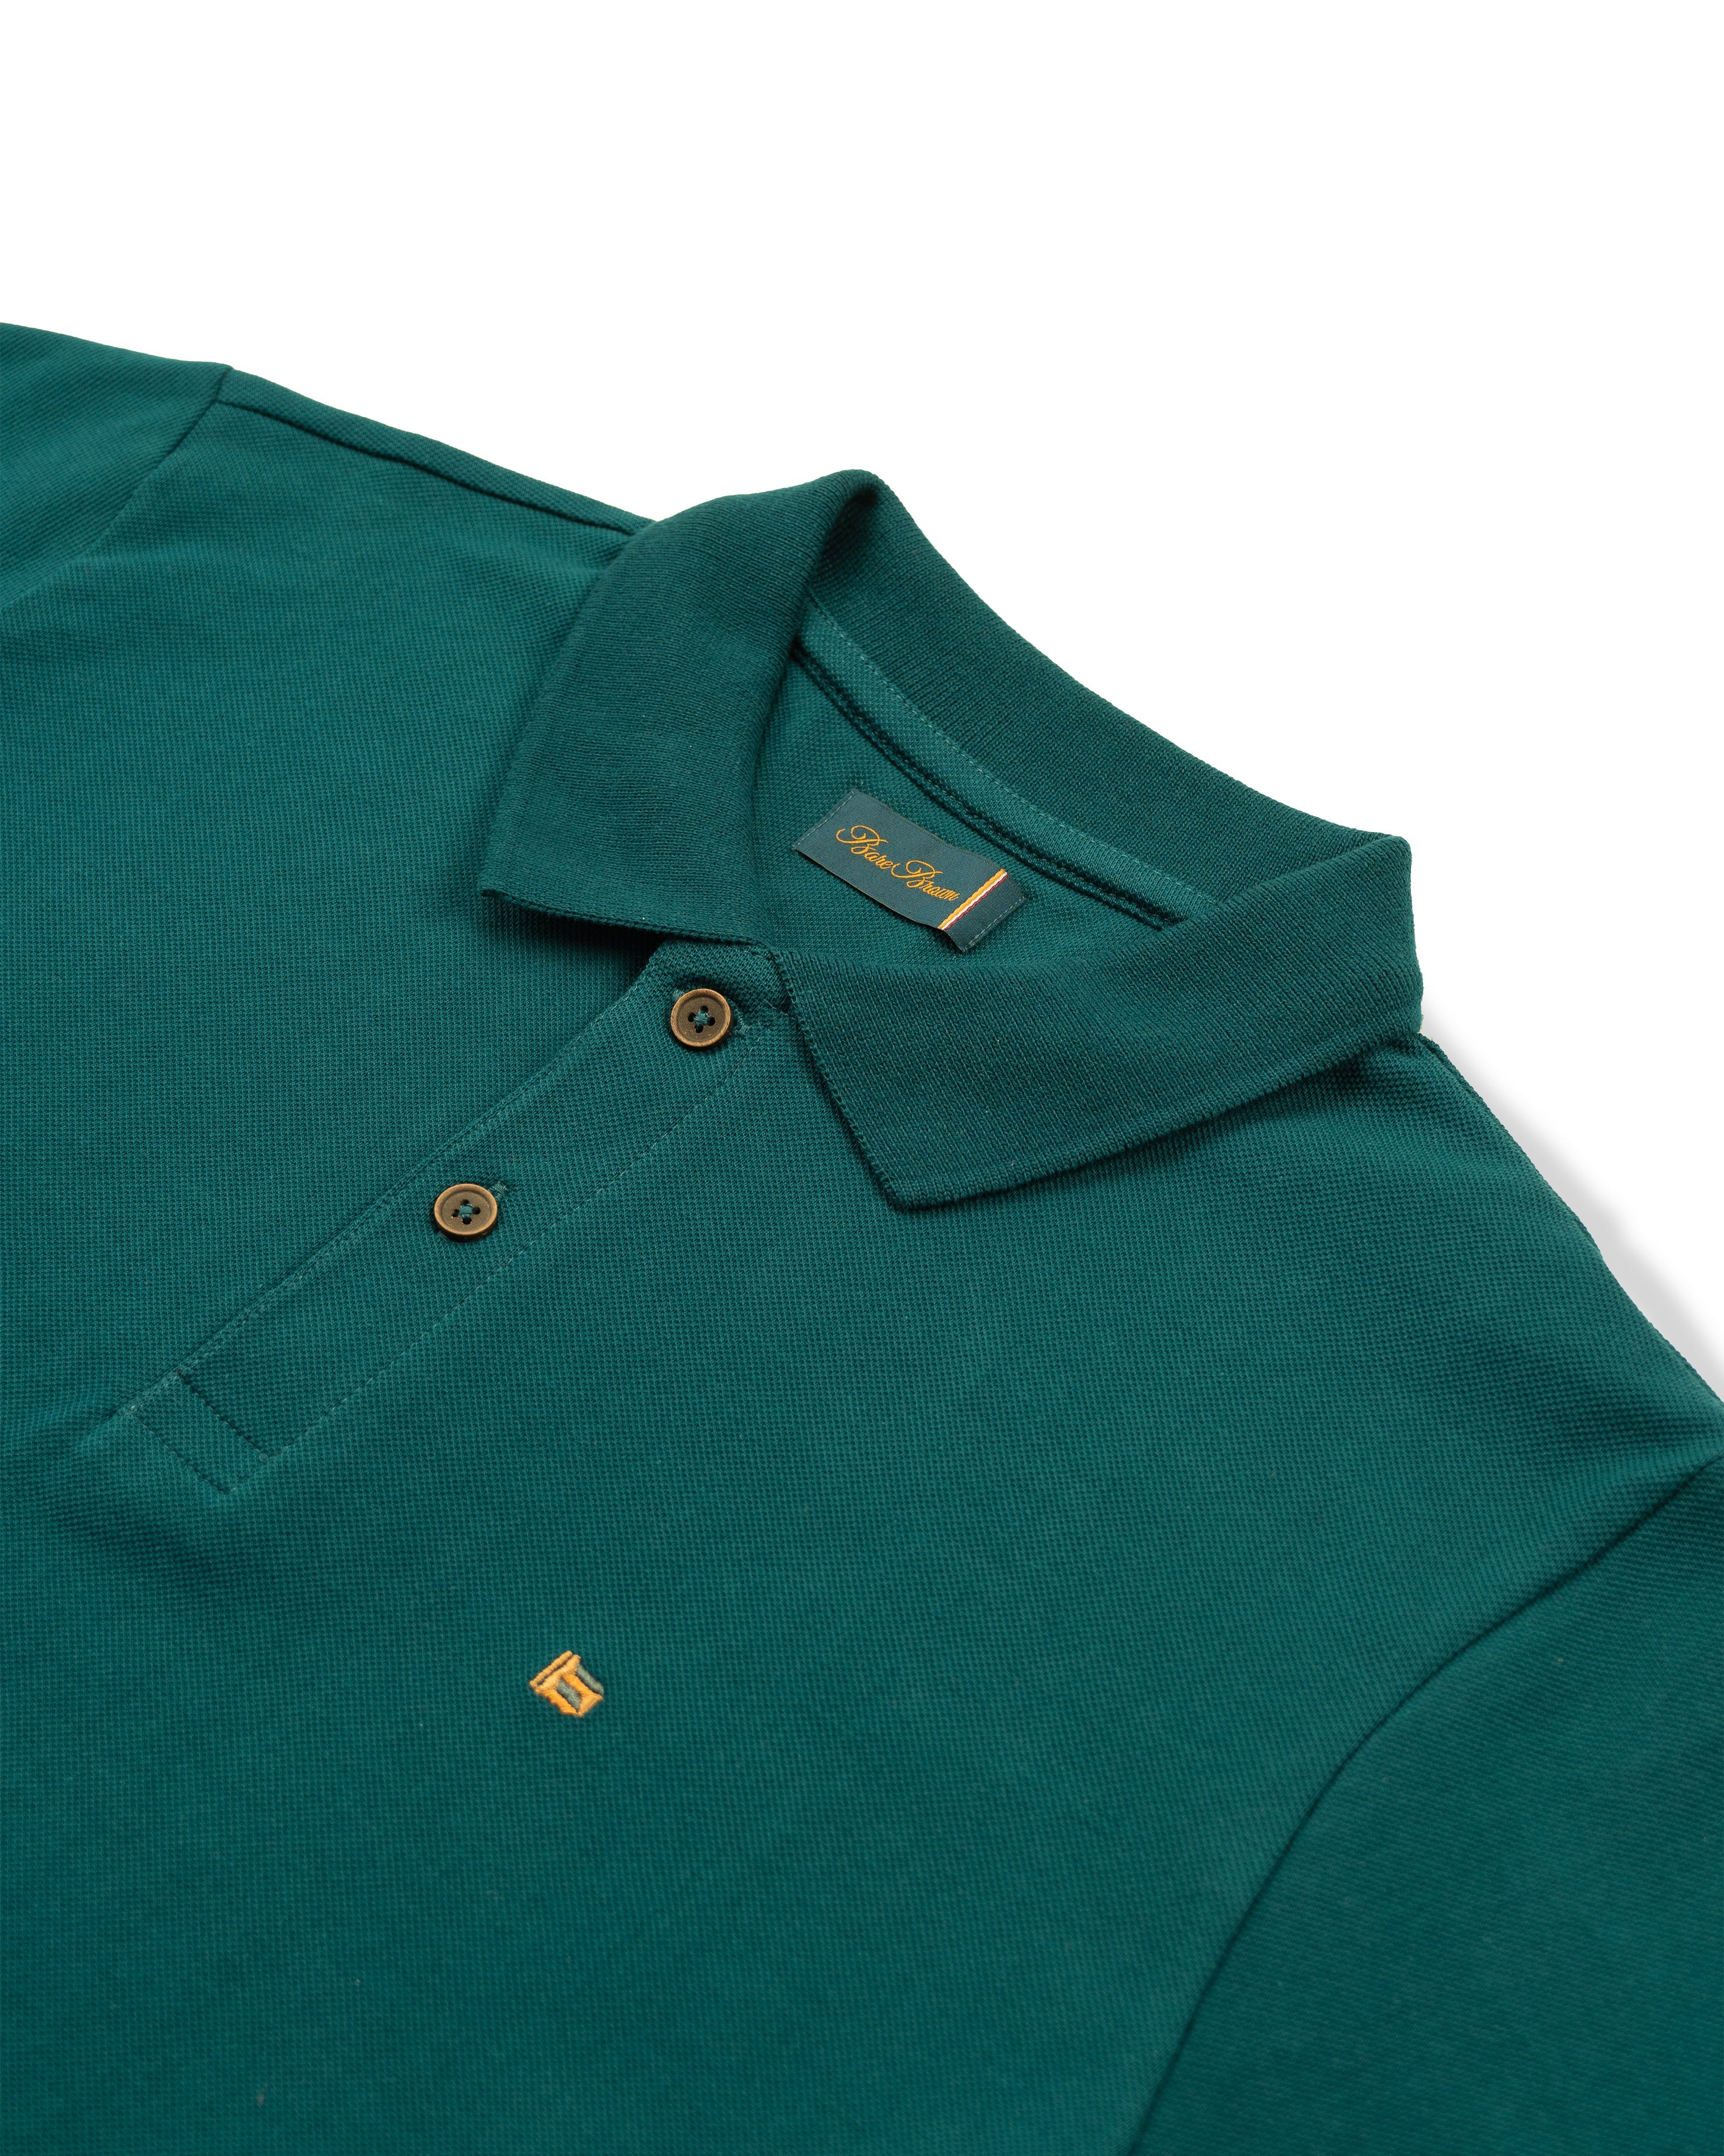 Bare Brown Teal Slim Fit Lightweight Polo T-Shirt